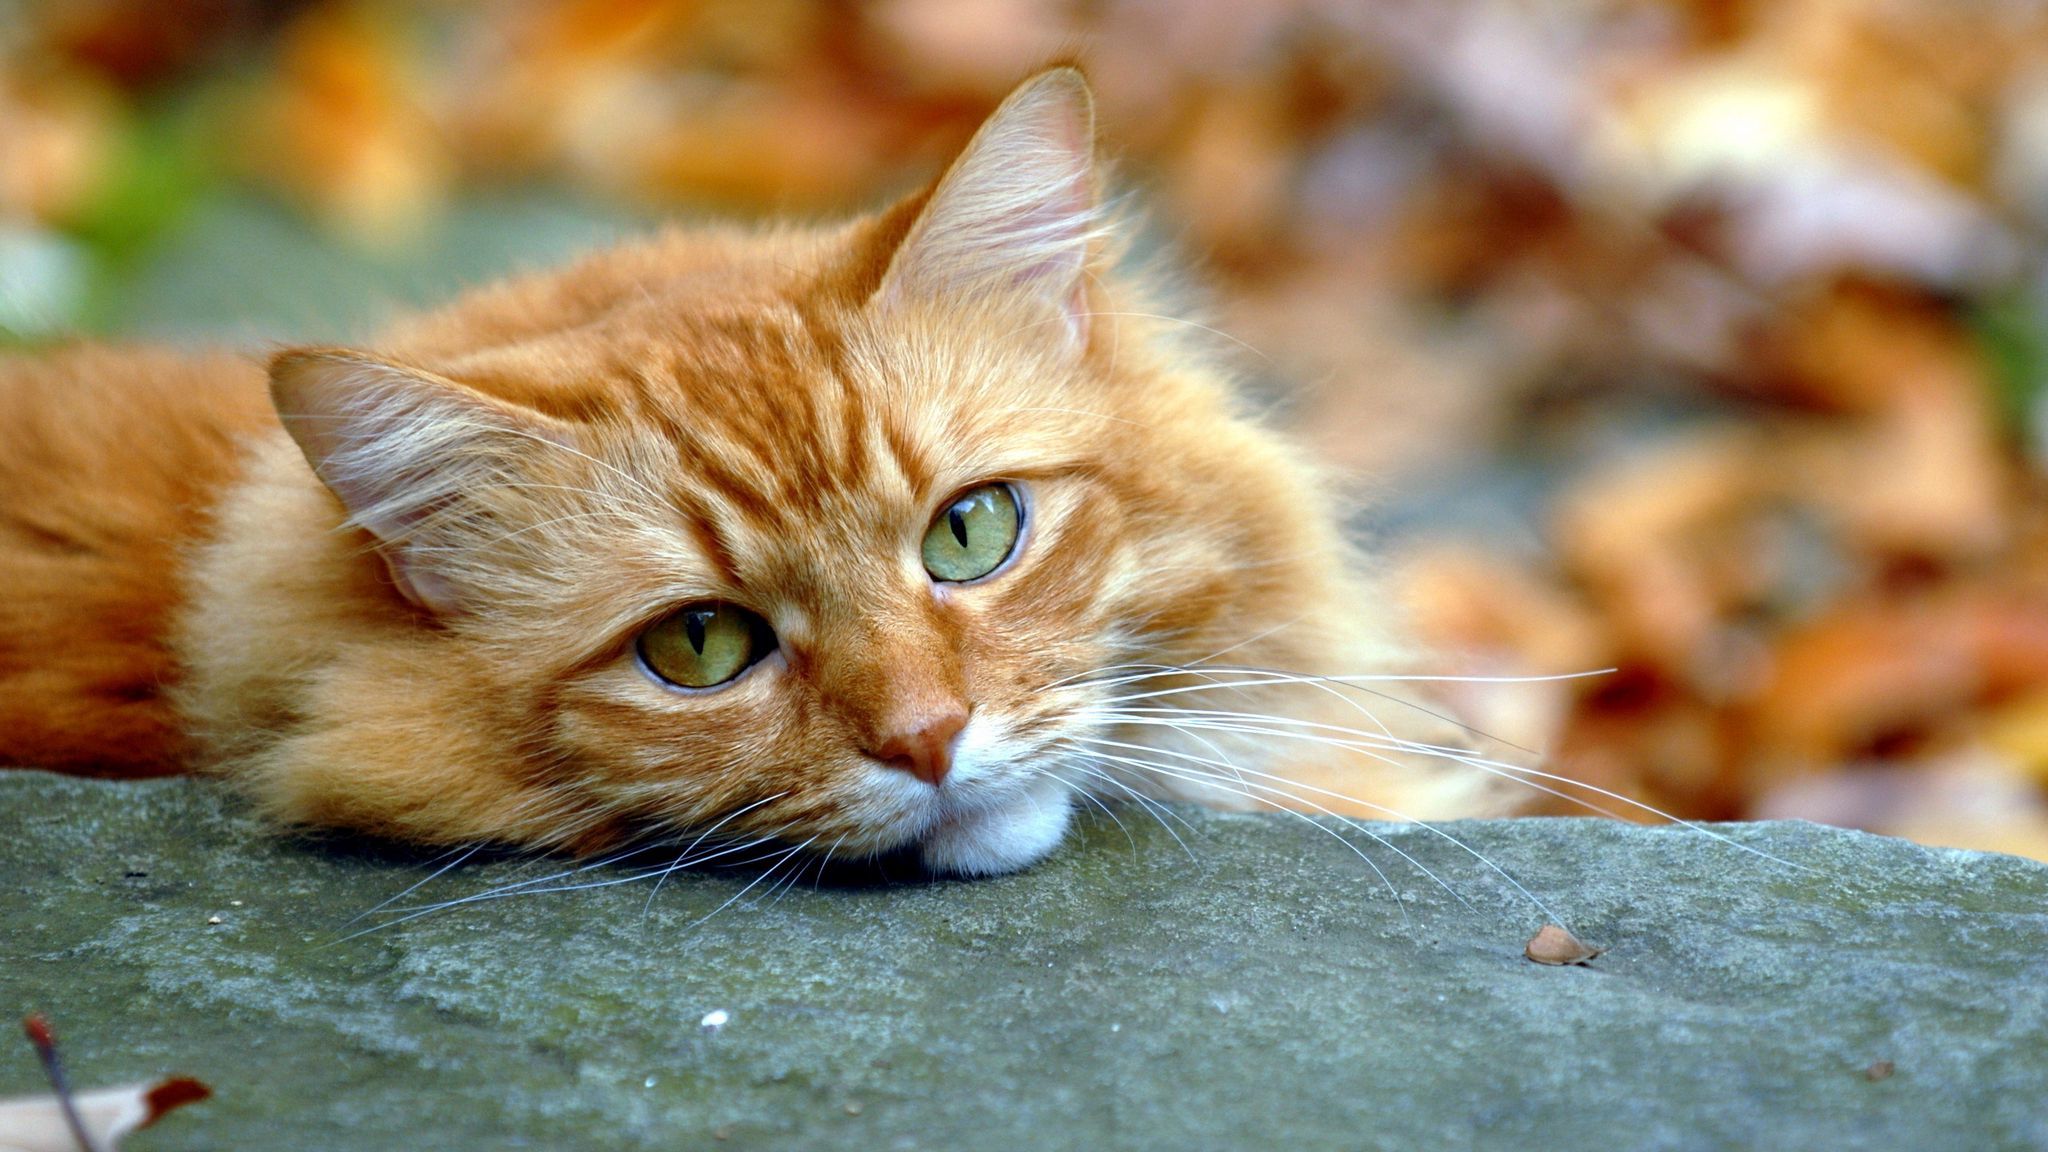 Download wallpaper 2048x1152 opinion, cat, autumn, red ultrawide monitor HD background